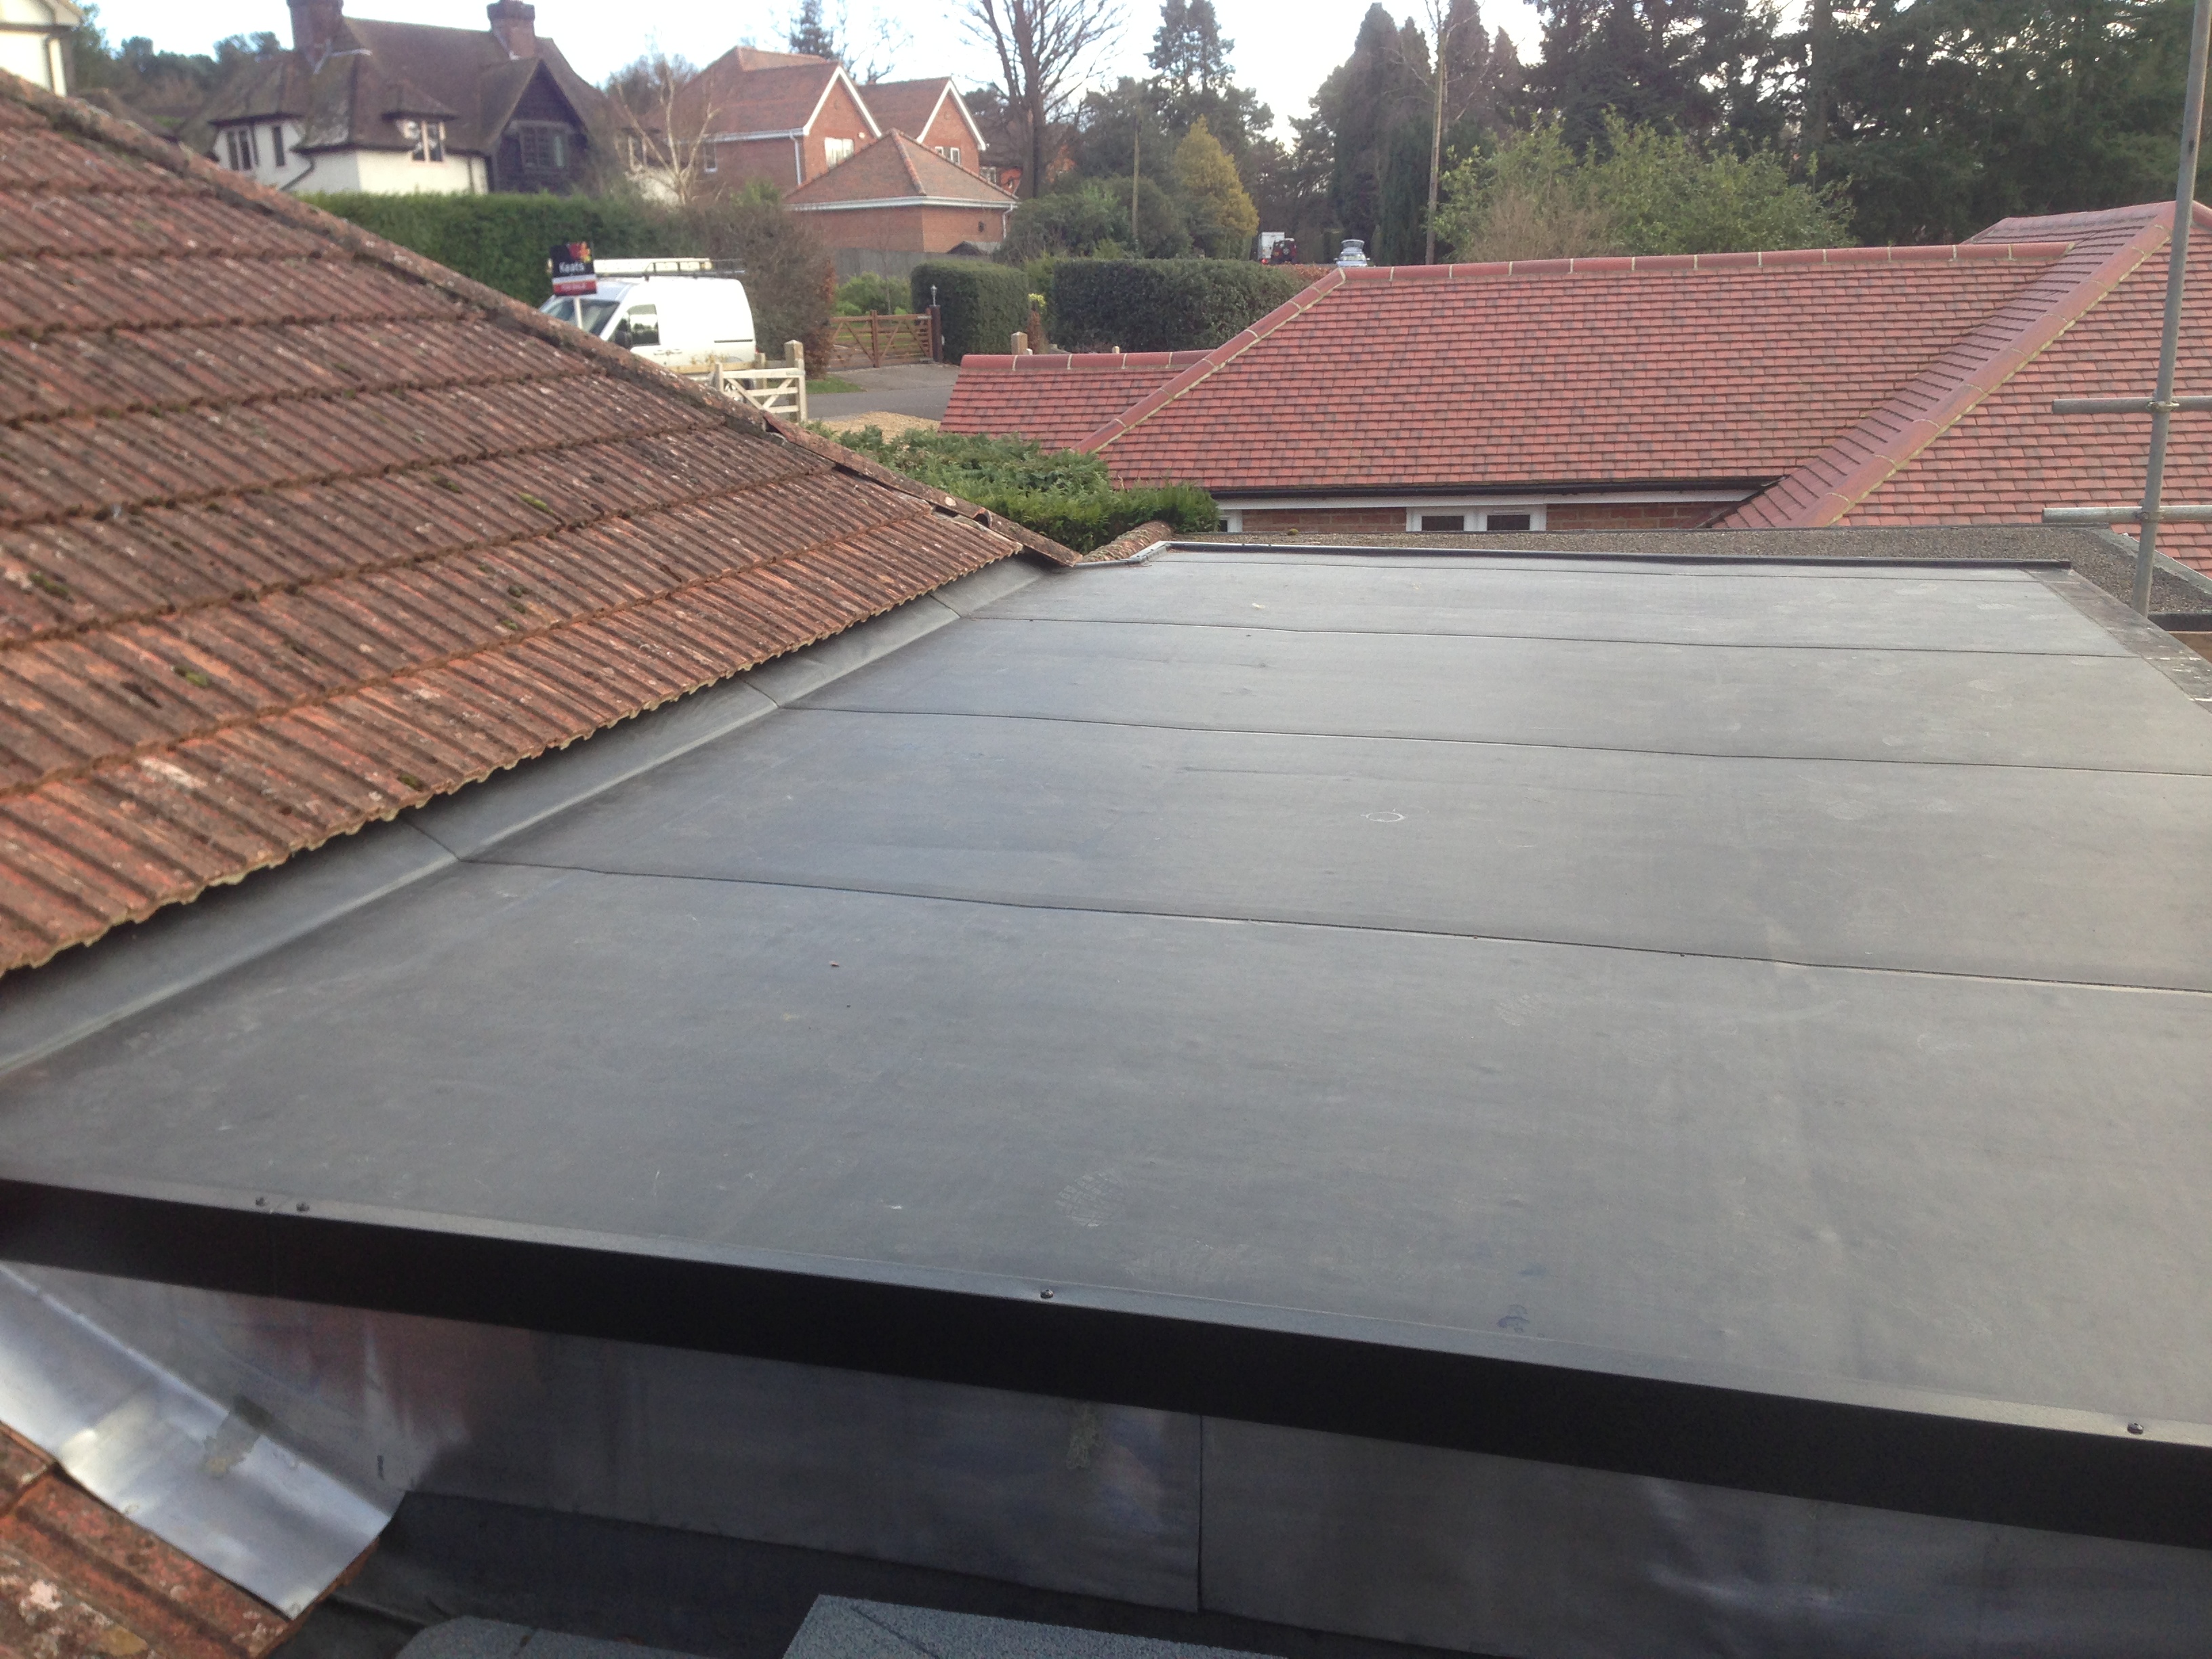 Advantages and Disadvantages of Rubber Roofing Materials